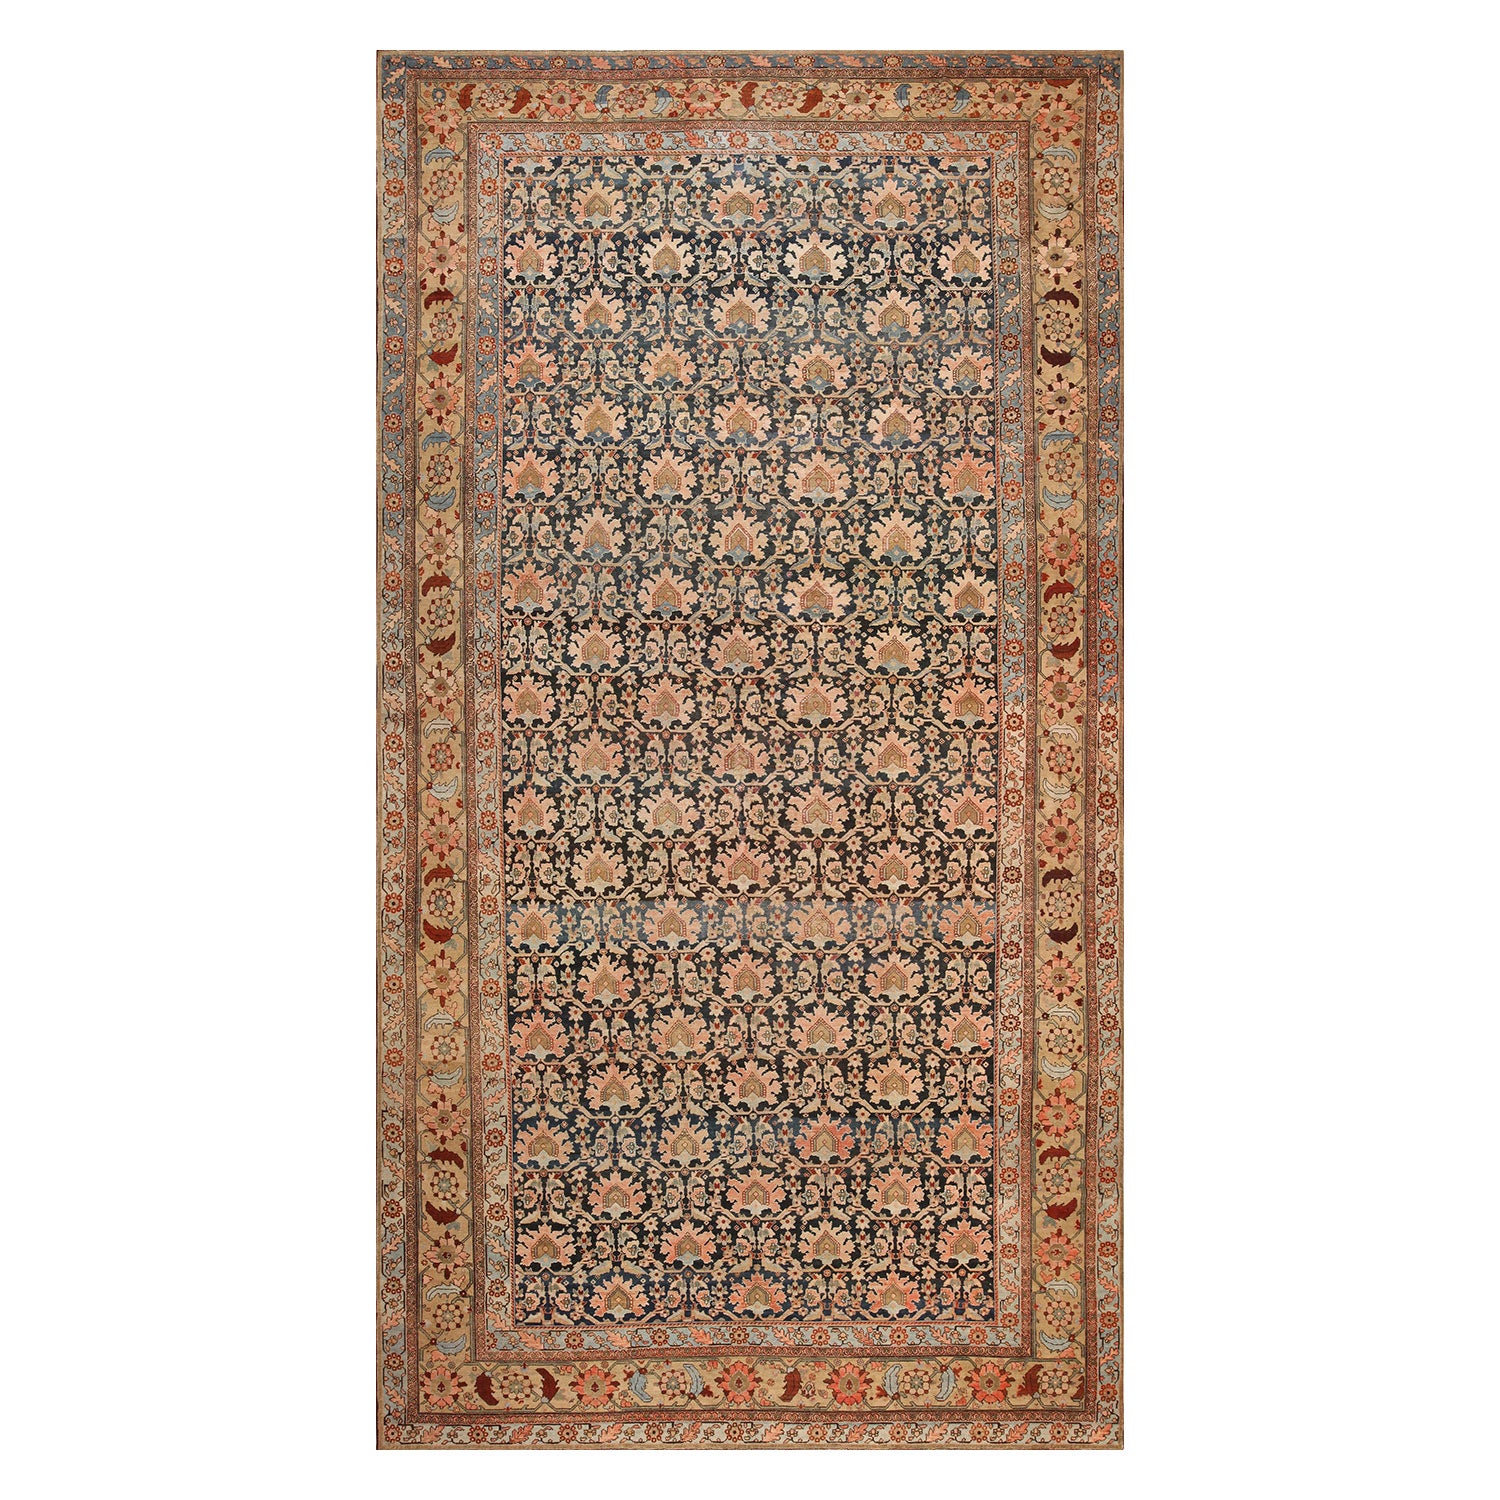 Exquisite handwoven floral rug with intricate patterns in earth tones.